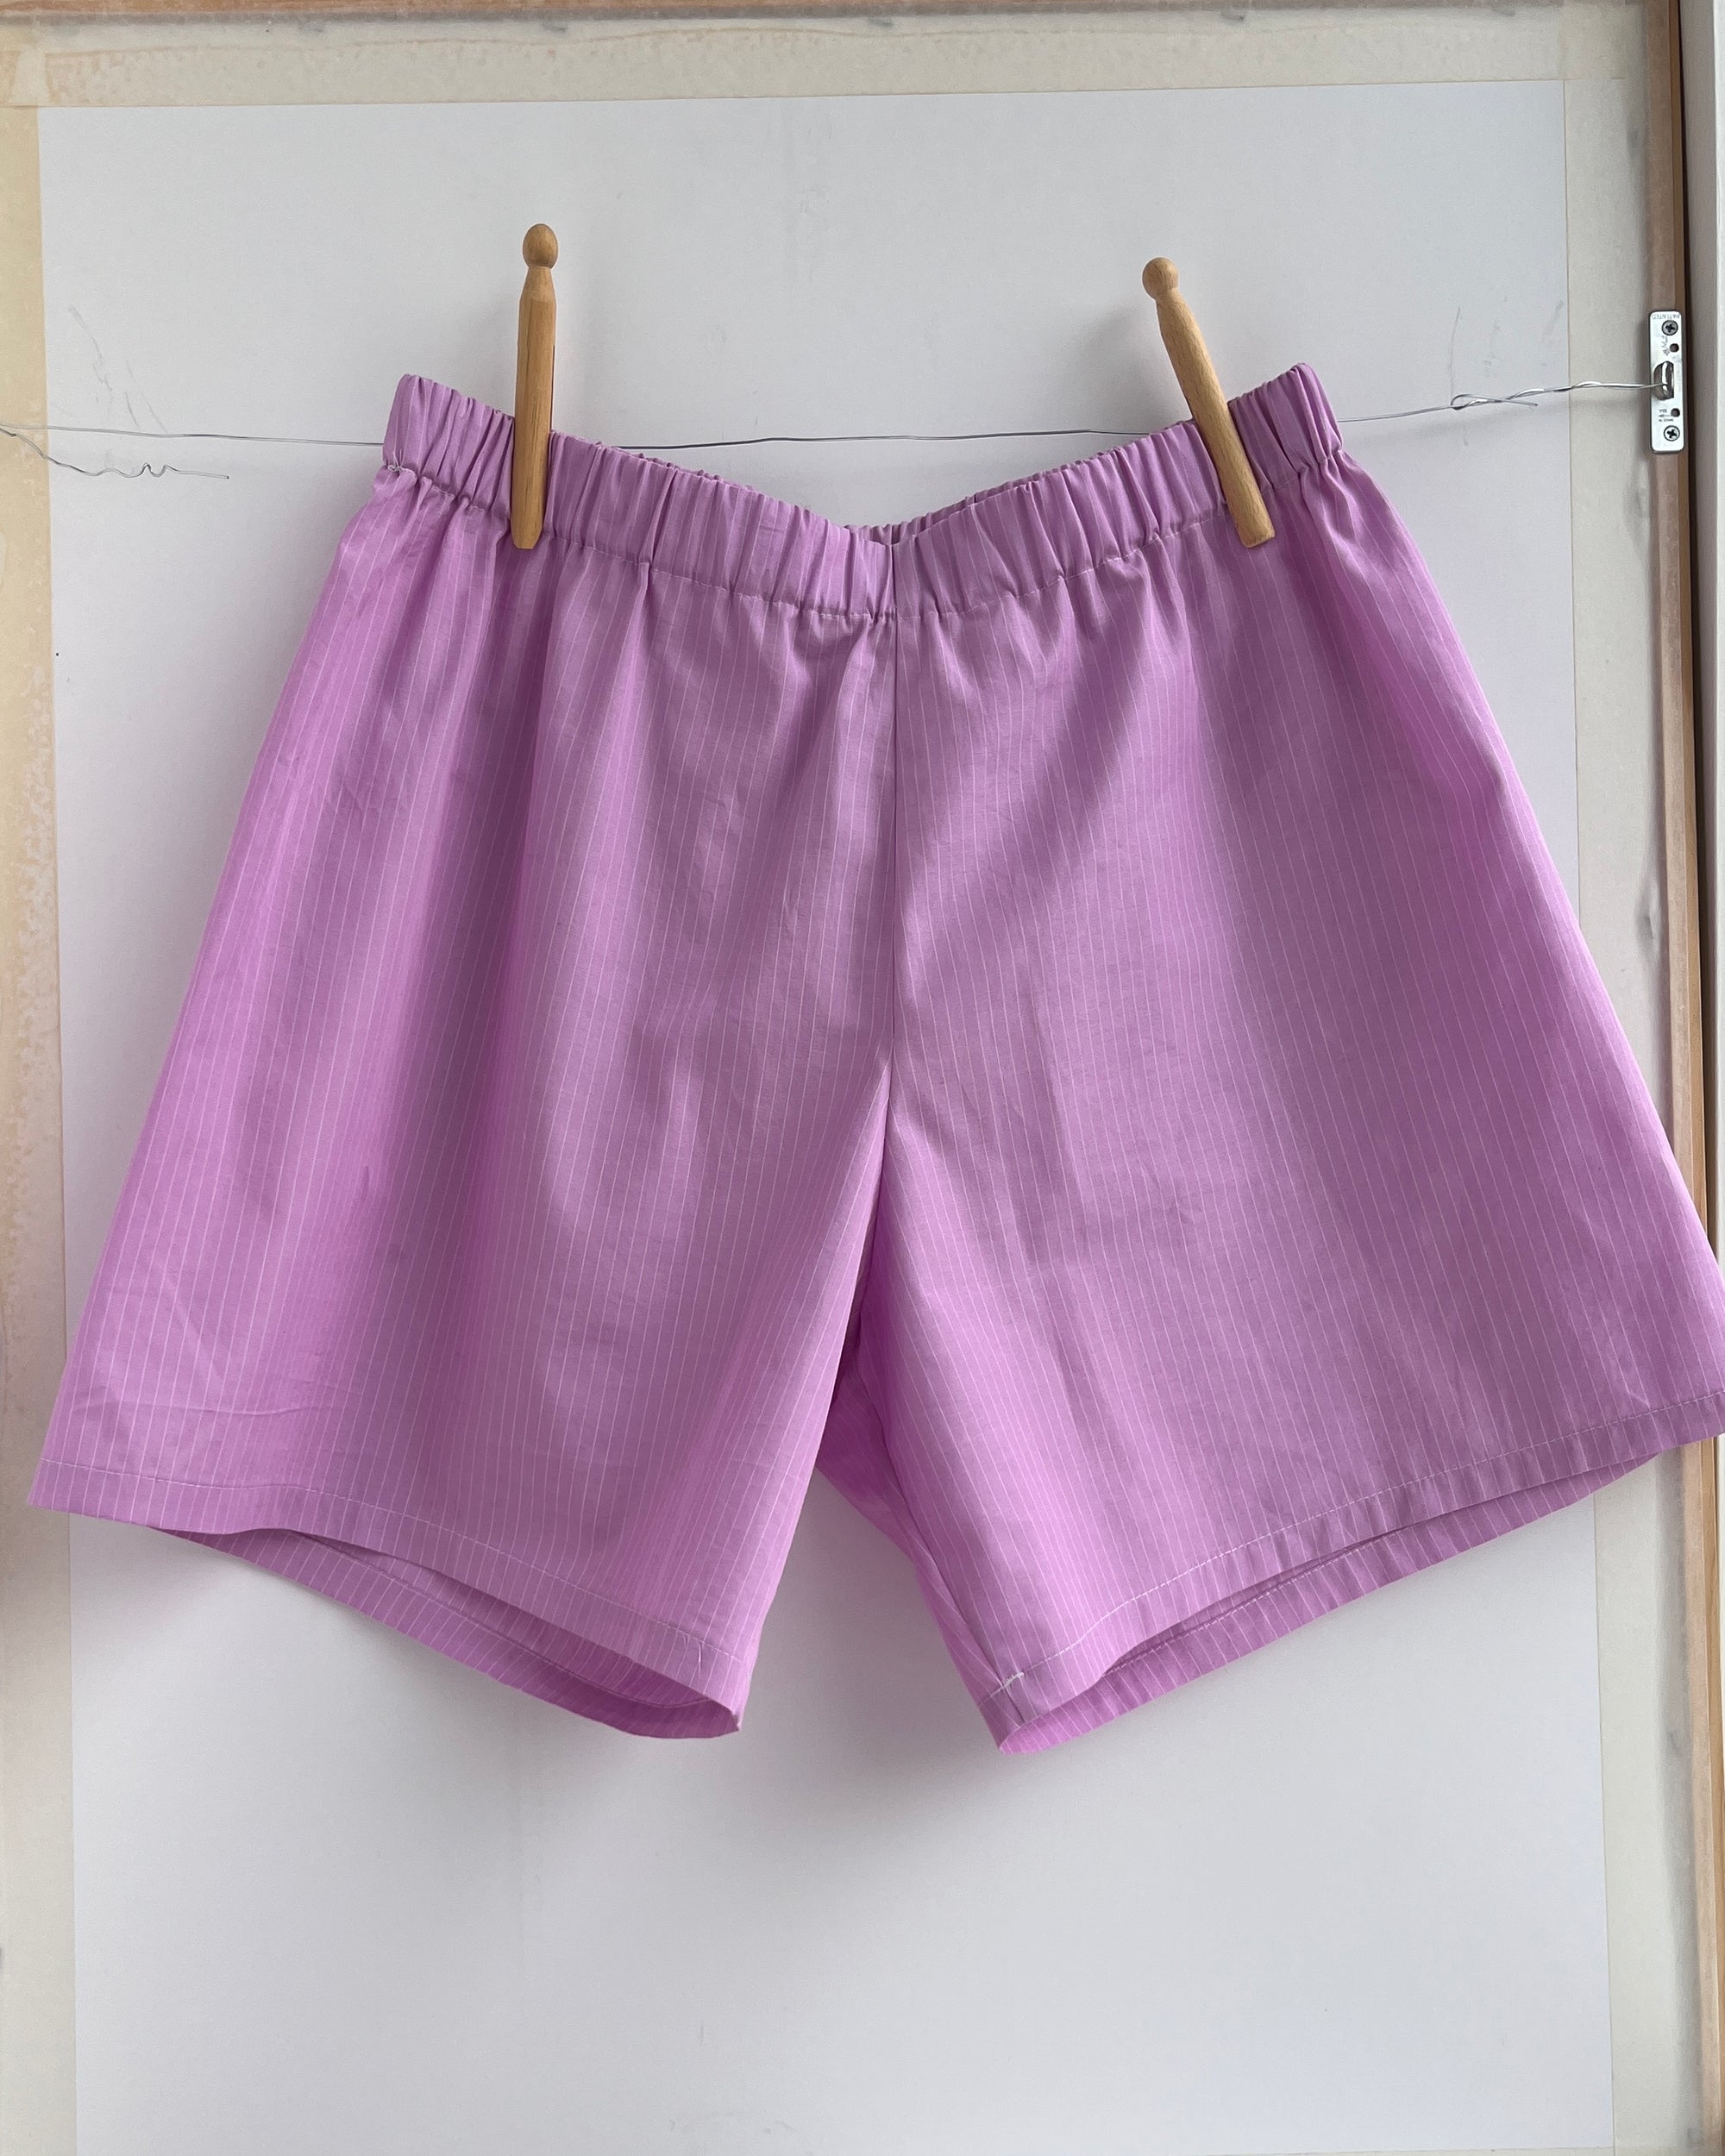 Sewing Project No. 03: Favorite Shorts